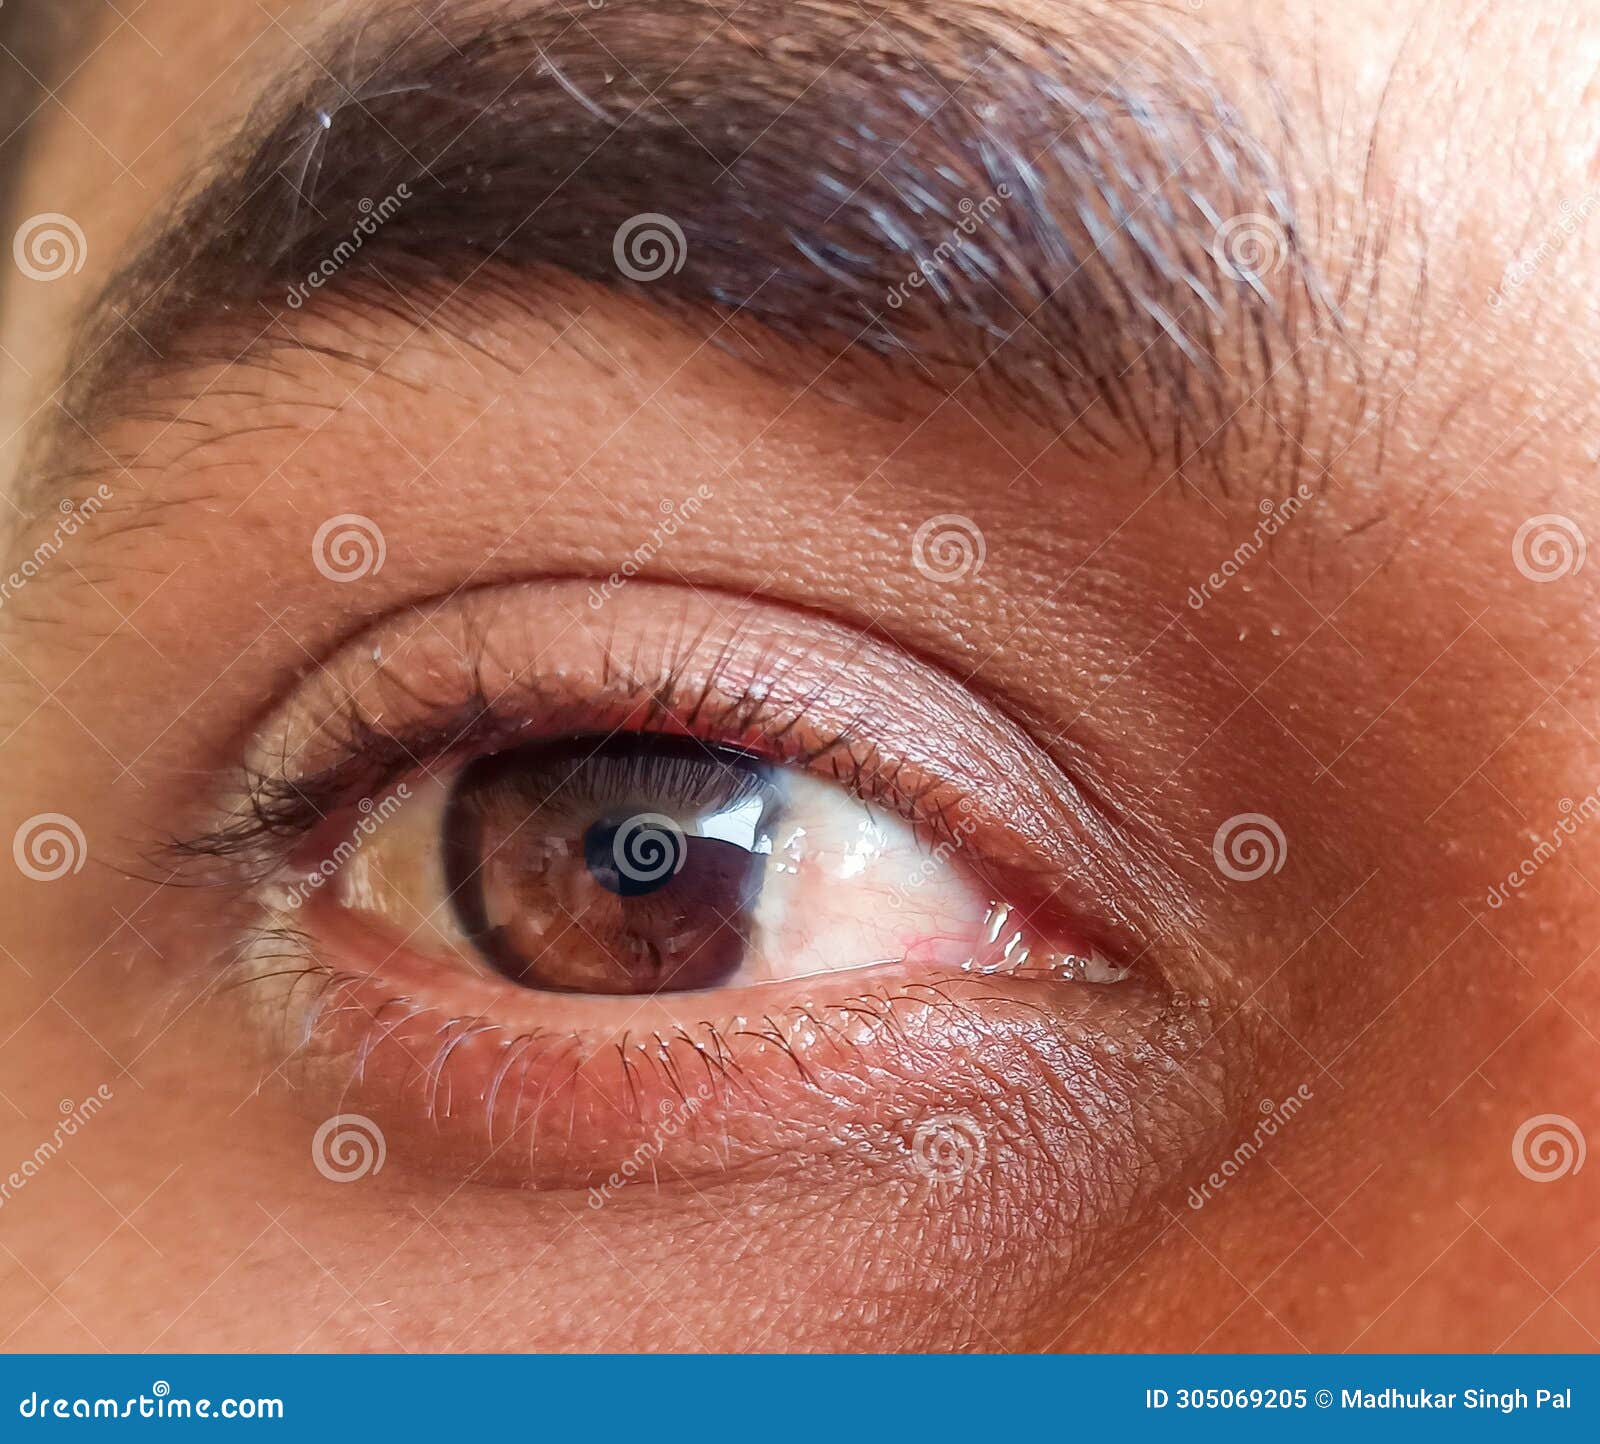 a man have pterygium is in the eye.